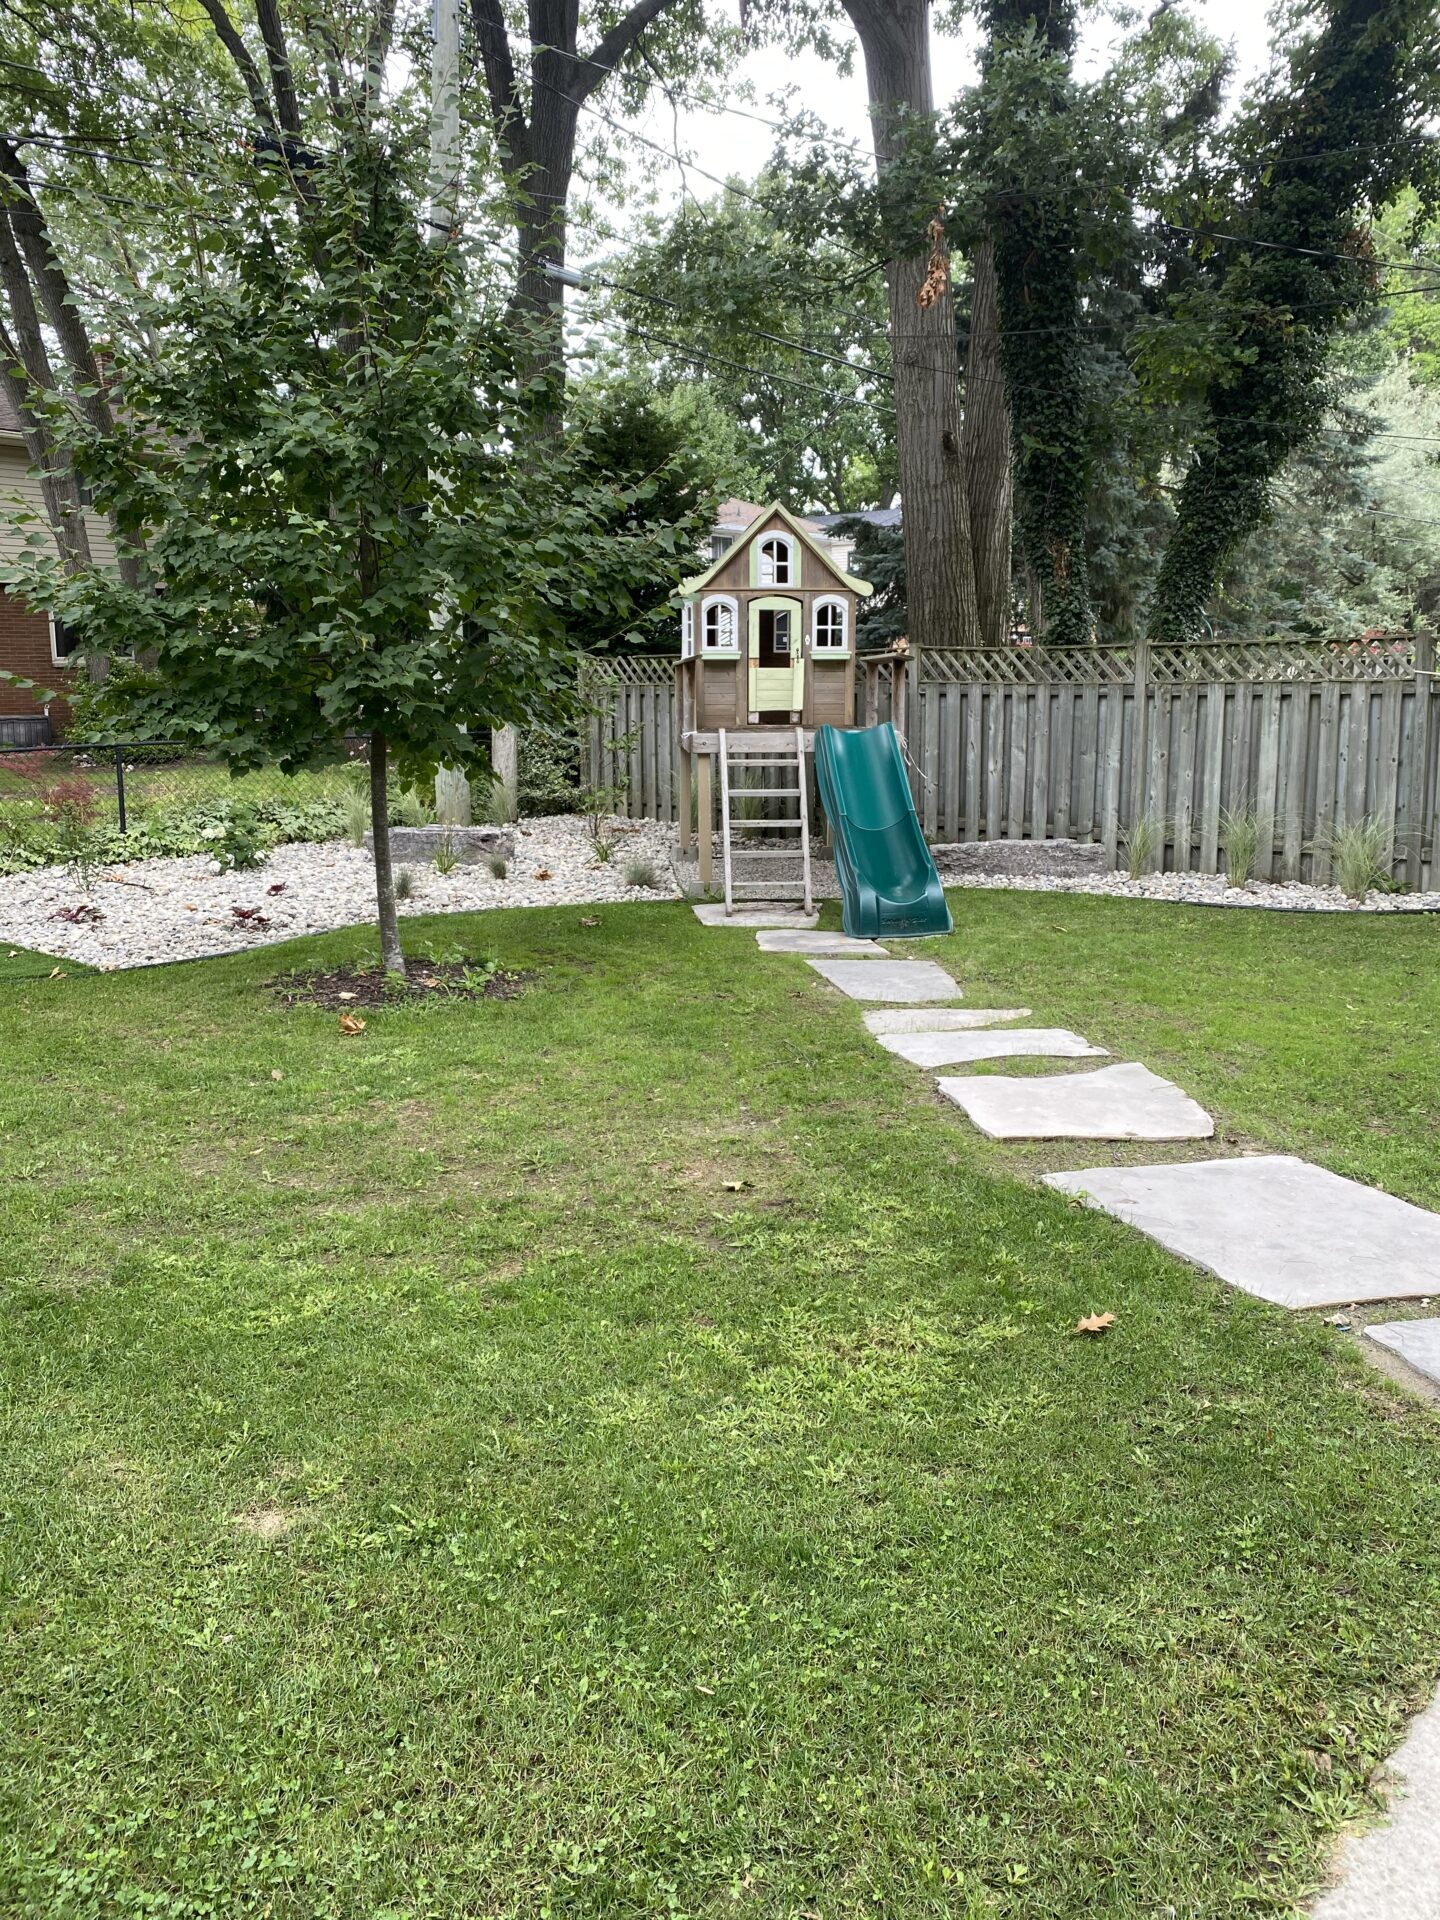 A backyard with a miniature playhouse on stilts, featuring a green slide and a stone path leading through a well-kept lawn amidst trees.